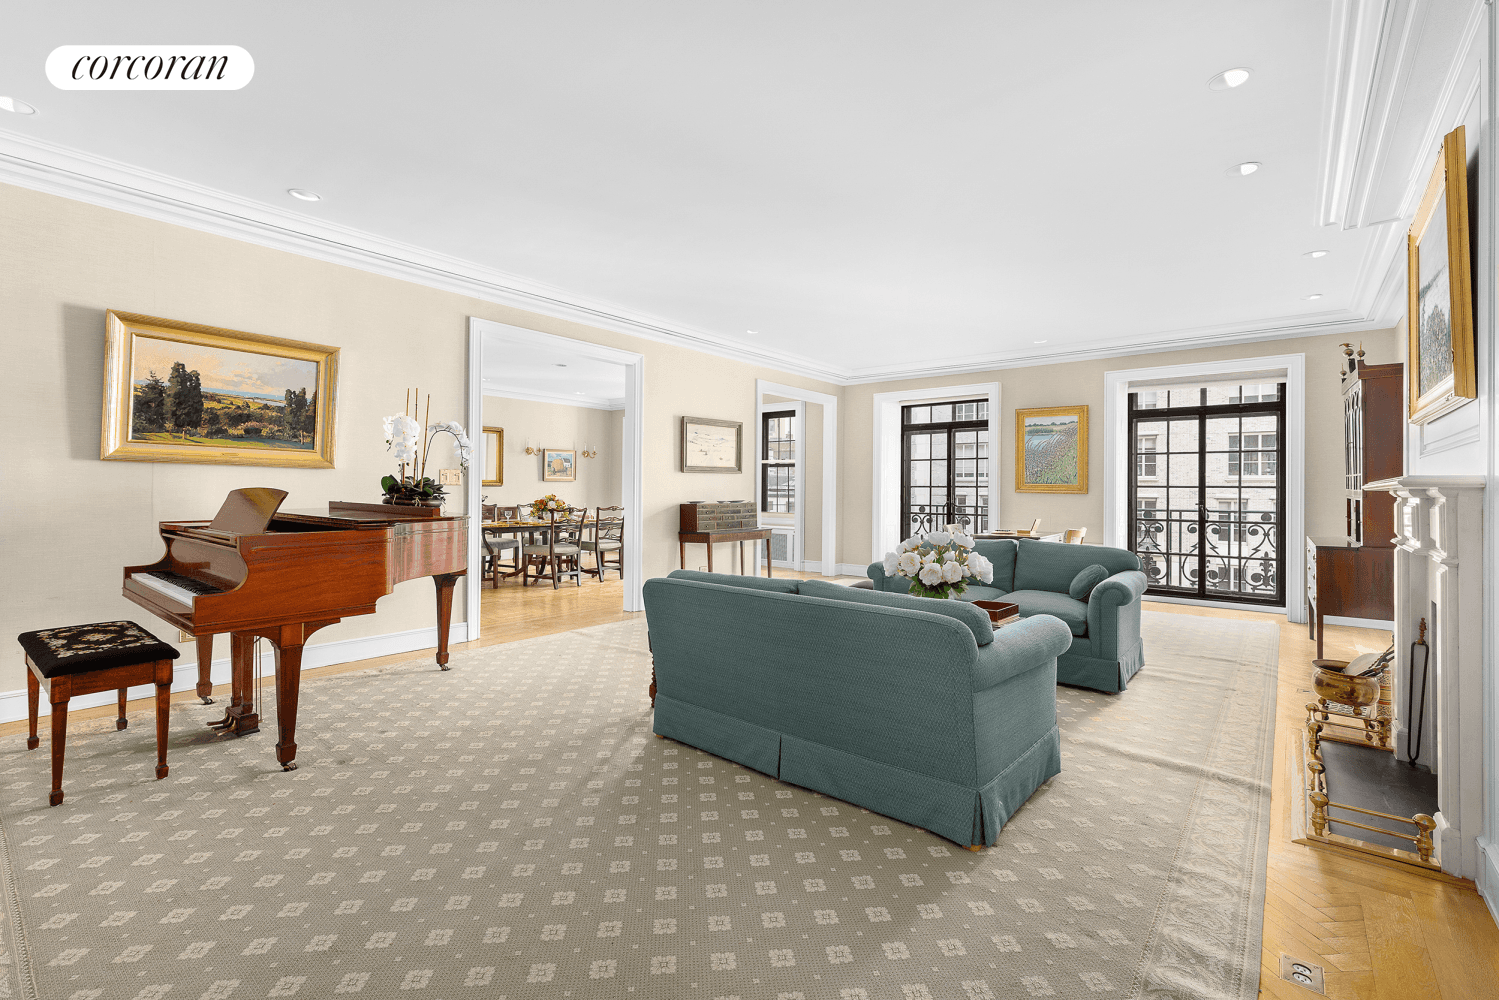 Rarely available, this gracious and stylish Prewar ten room beauty currently configured into 8 rooms offers exceptional flow and proportions throughout.